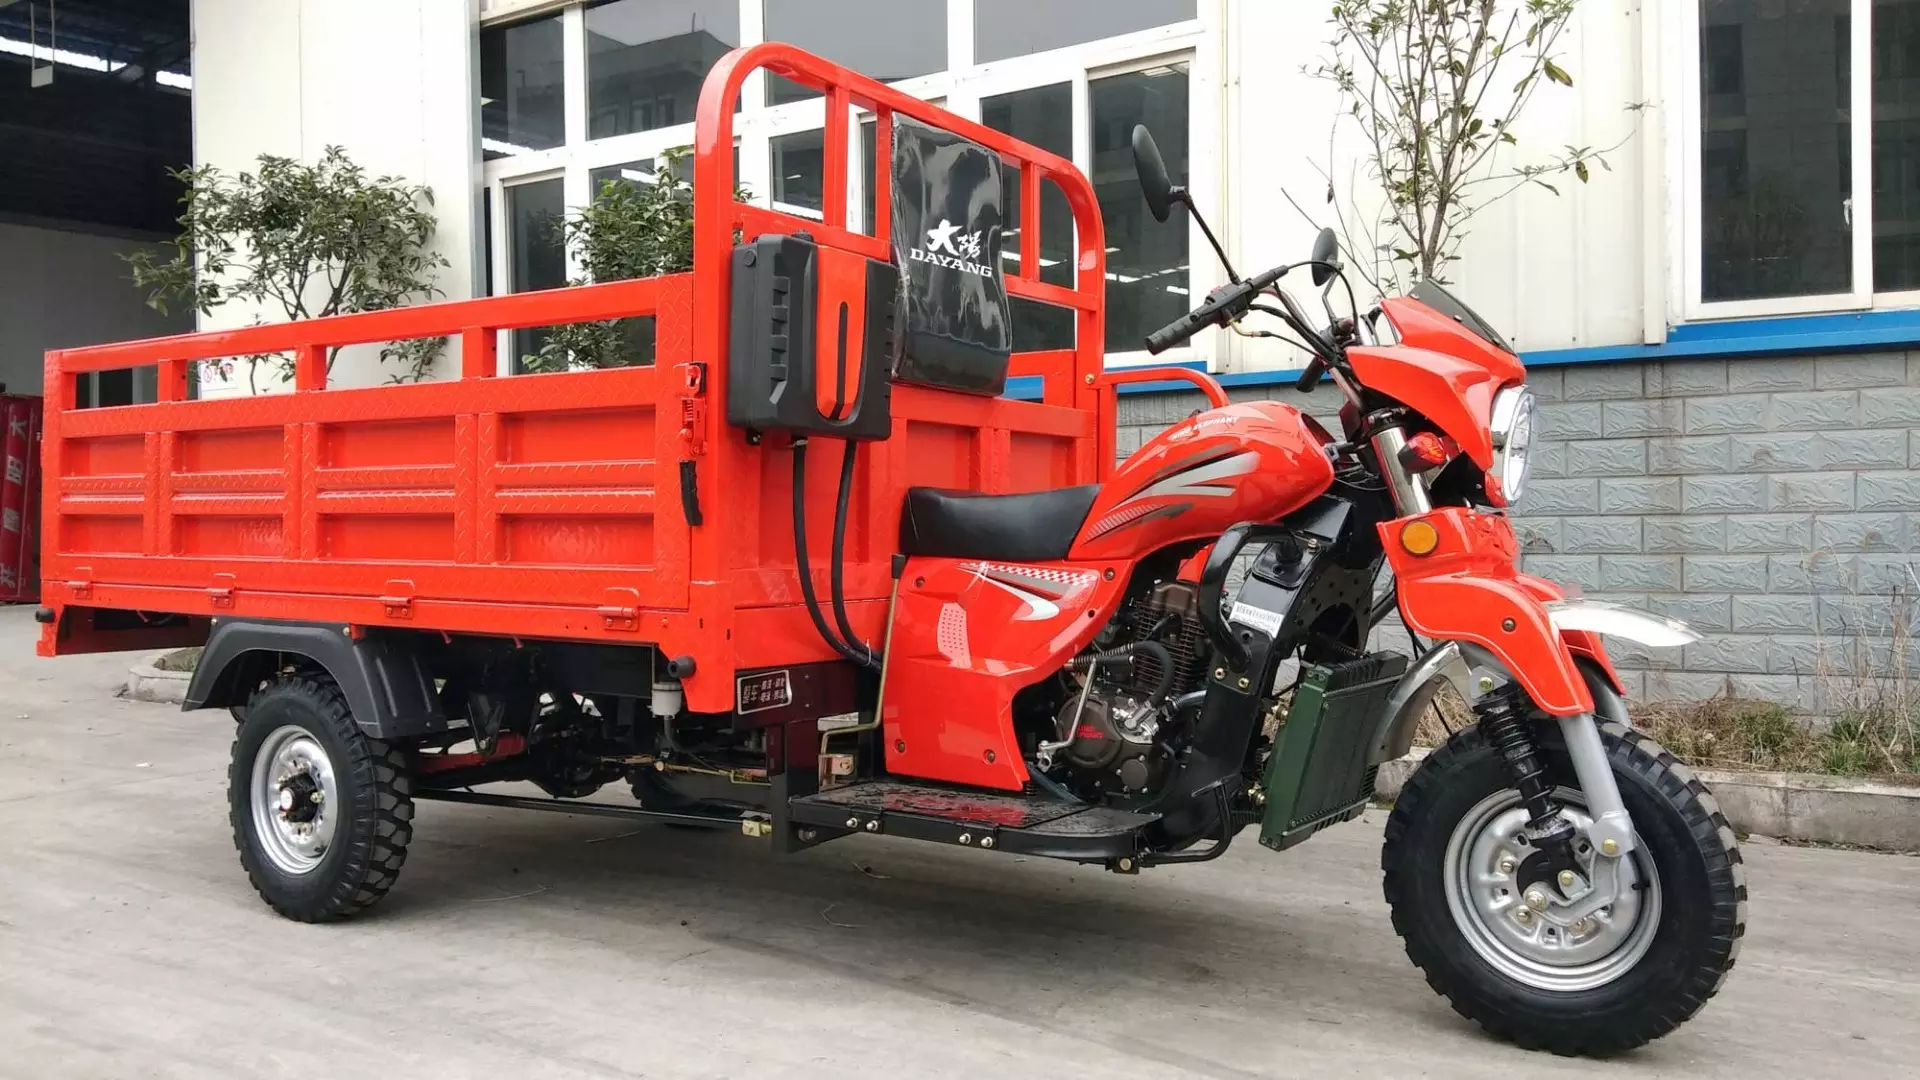 Hot strong and sturdy export motorized petrol cargo adult fuel 200cc box container gas cargo tricycle